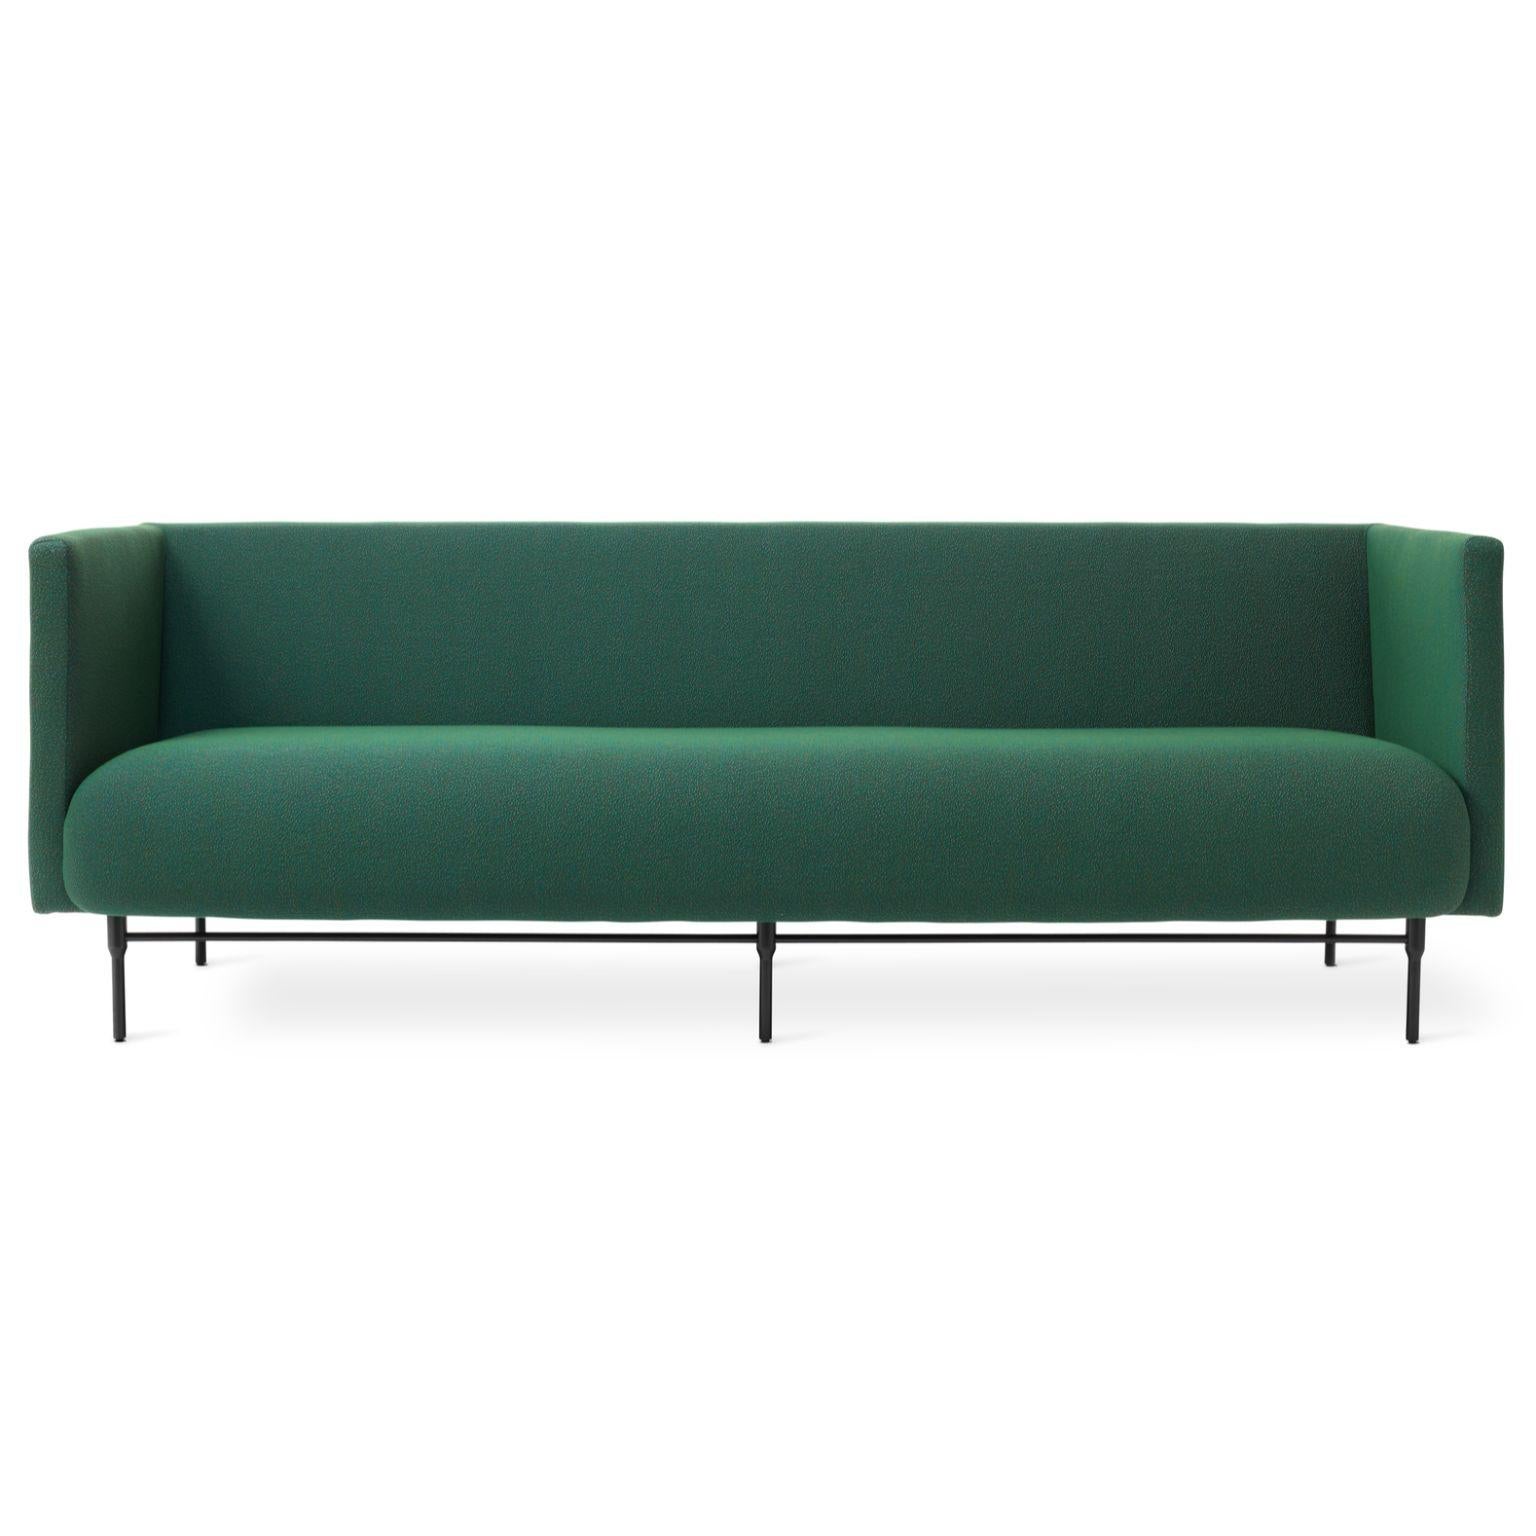 Galore 3 seater sprinkles eggplant by Warm Nordic.
Dimensions: D222 x W83 x H 76 cm.
Material: textile upholstery, powder coated black steel legs, wooden frame, foam, spring system.
Weight: 62 kg
Also available in different colours and finishes.